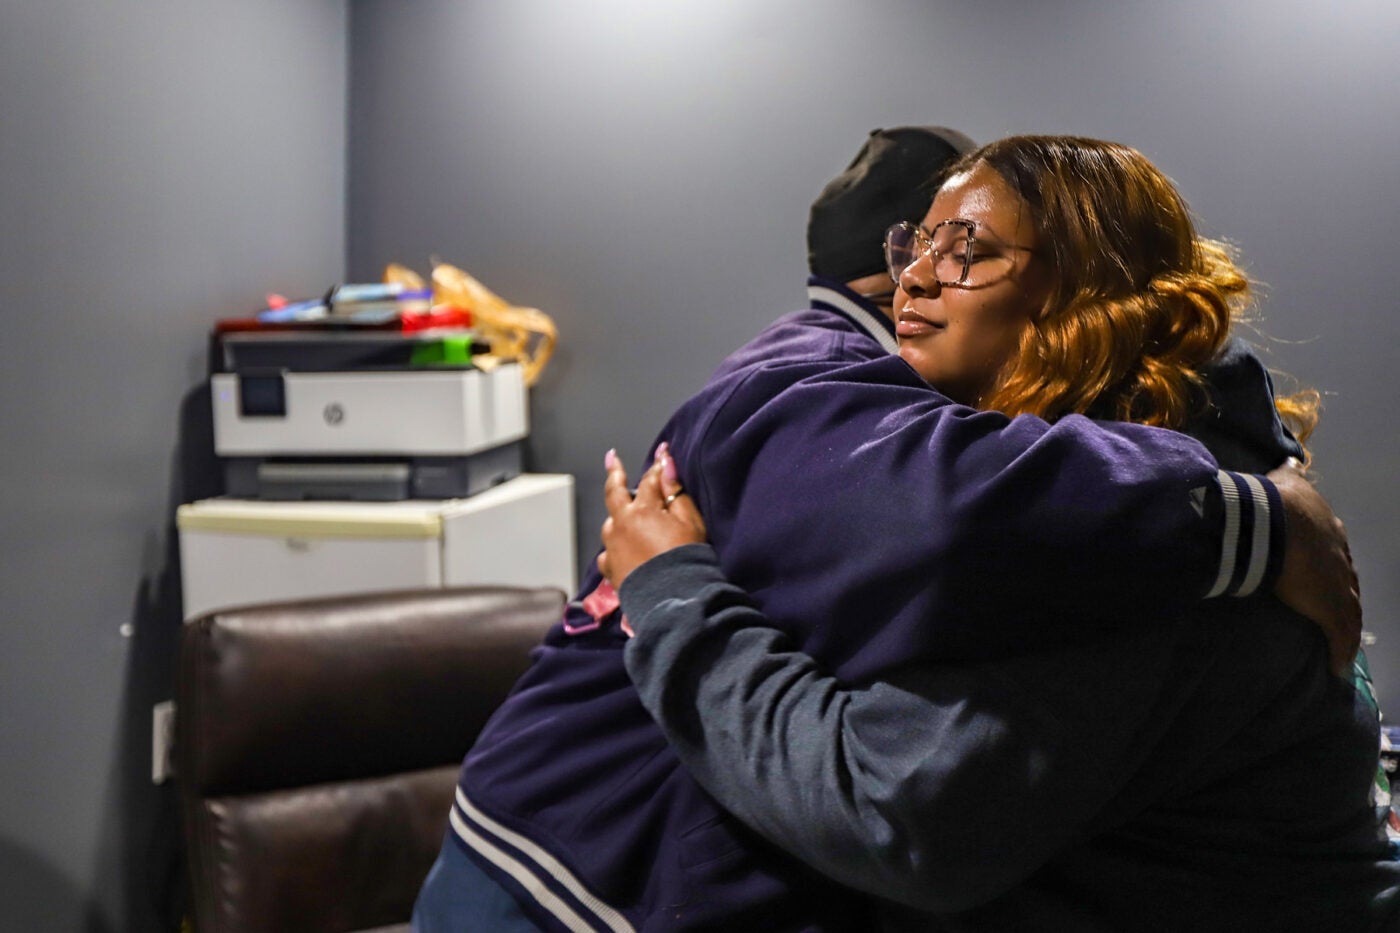 Dionna Brown and her father embrace inside his office.